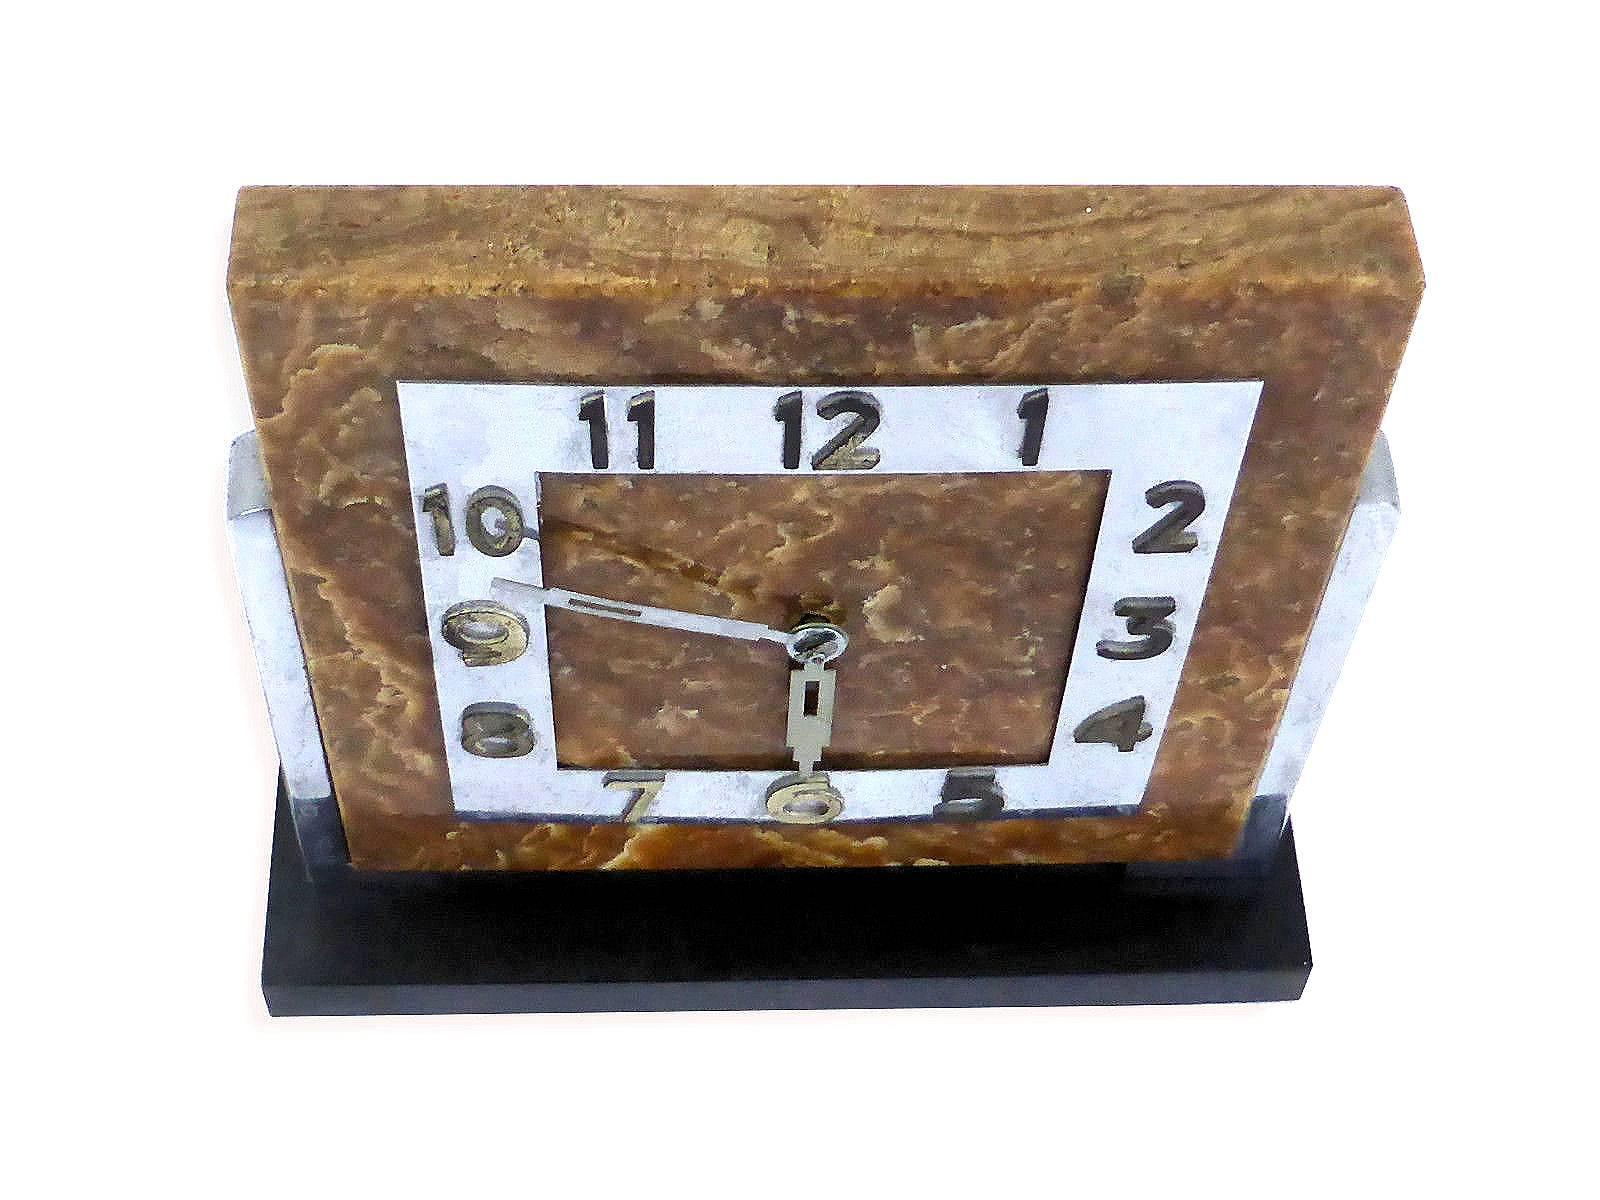 Impressive 1930s modernist clock originating from Germany. The base is black slate marble and the face is Onyx with a chrome frame. Great sized clock, ideal for mantel or desk.